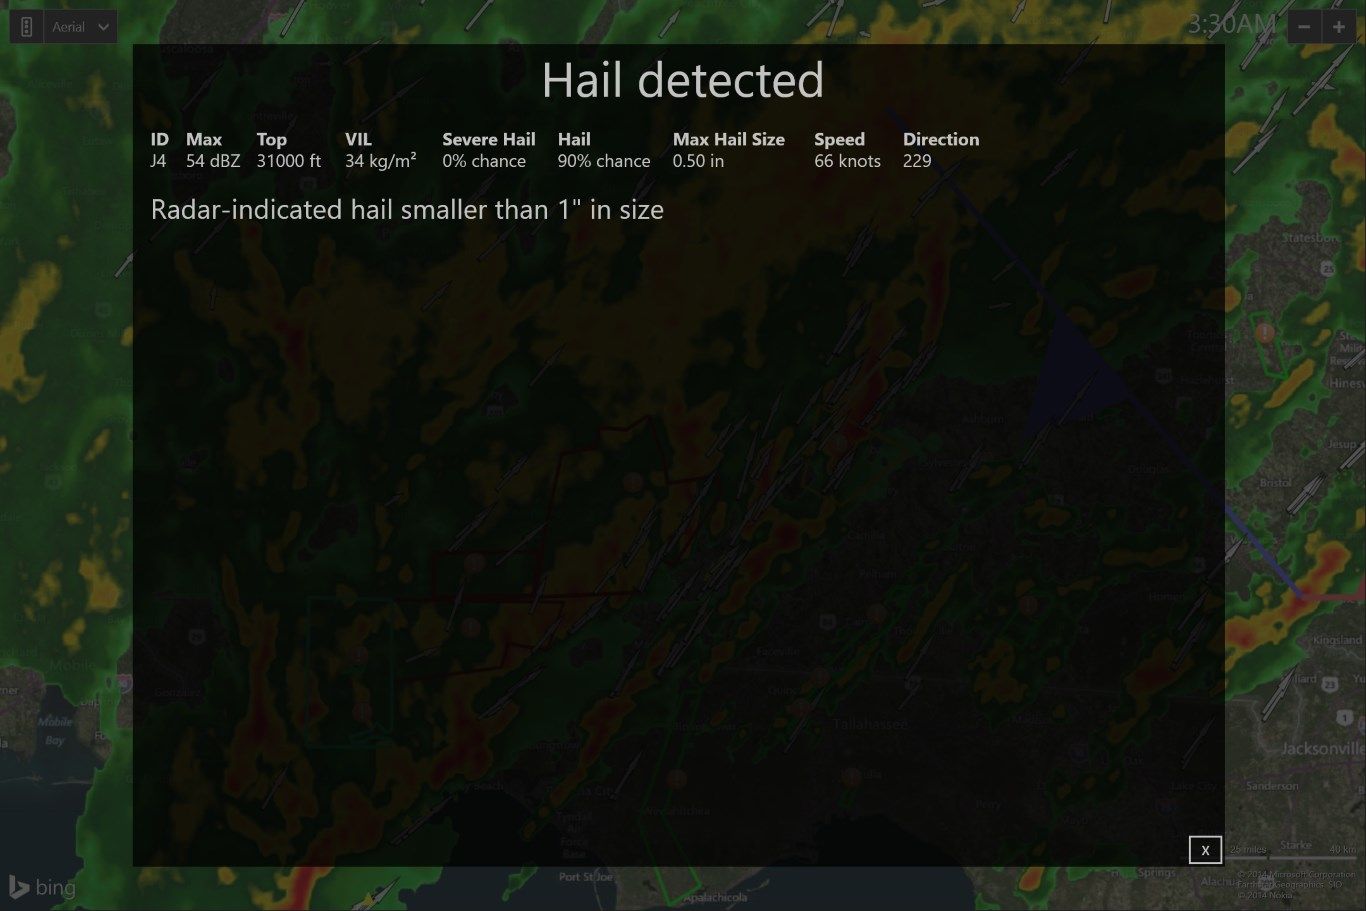 Storm attribute table predicts hail size and probability of hail